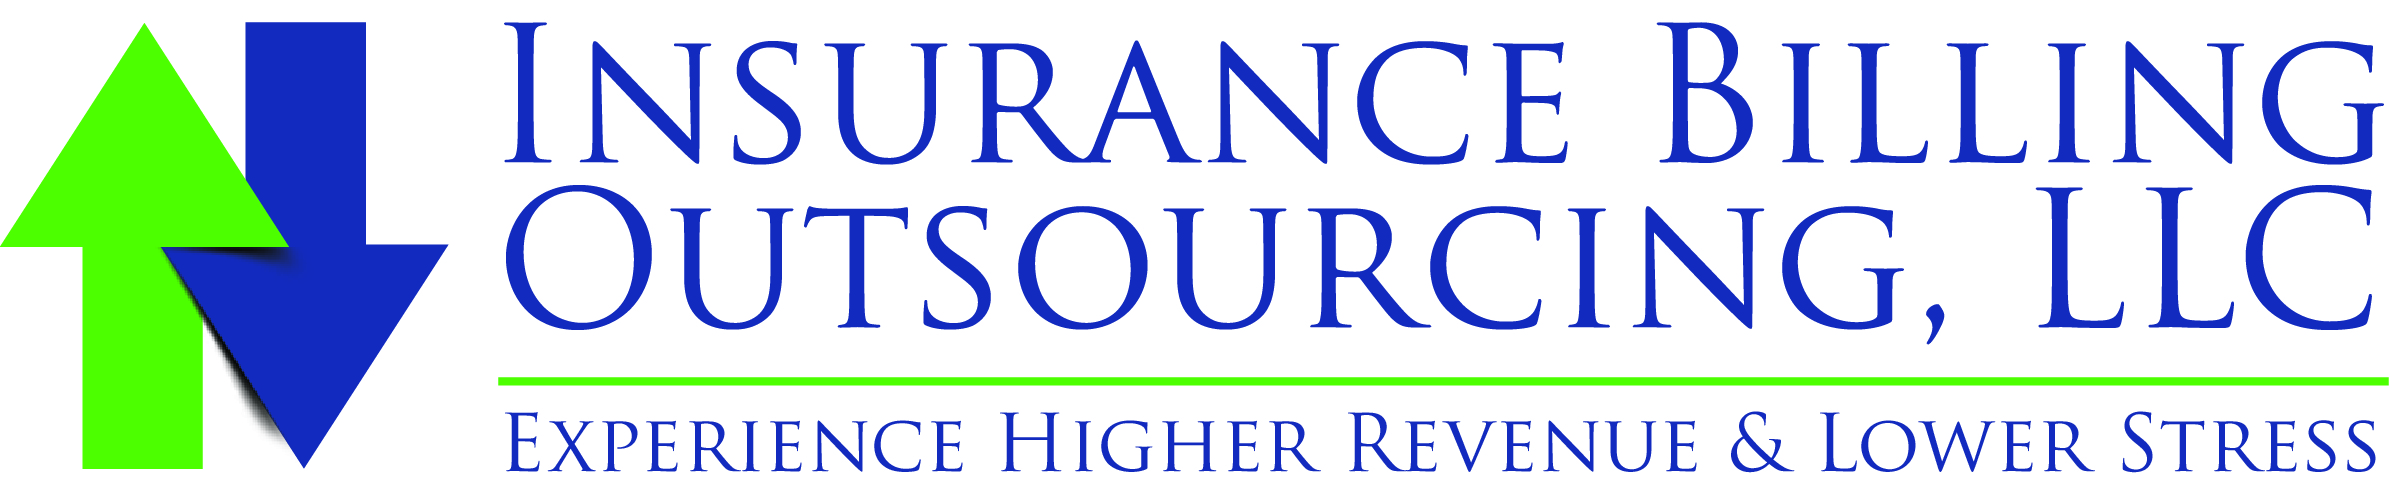 Insurance Billing Outsourcing, LLC – Experience Higher Revenue & Lower Stress